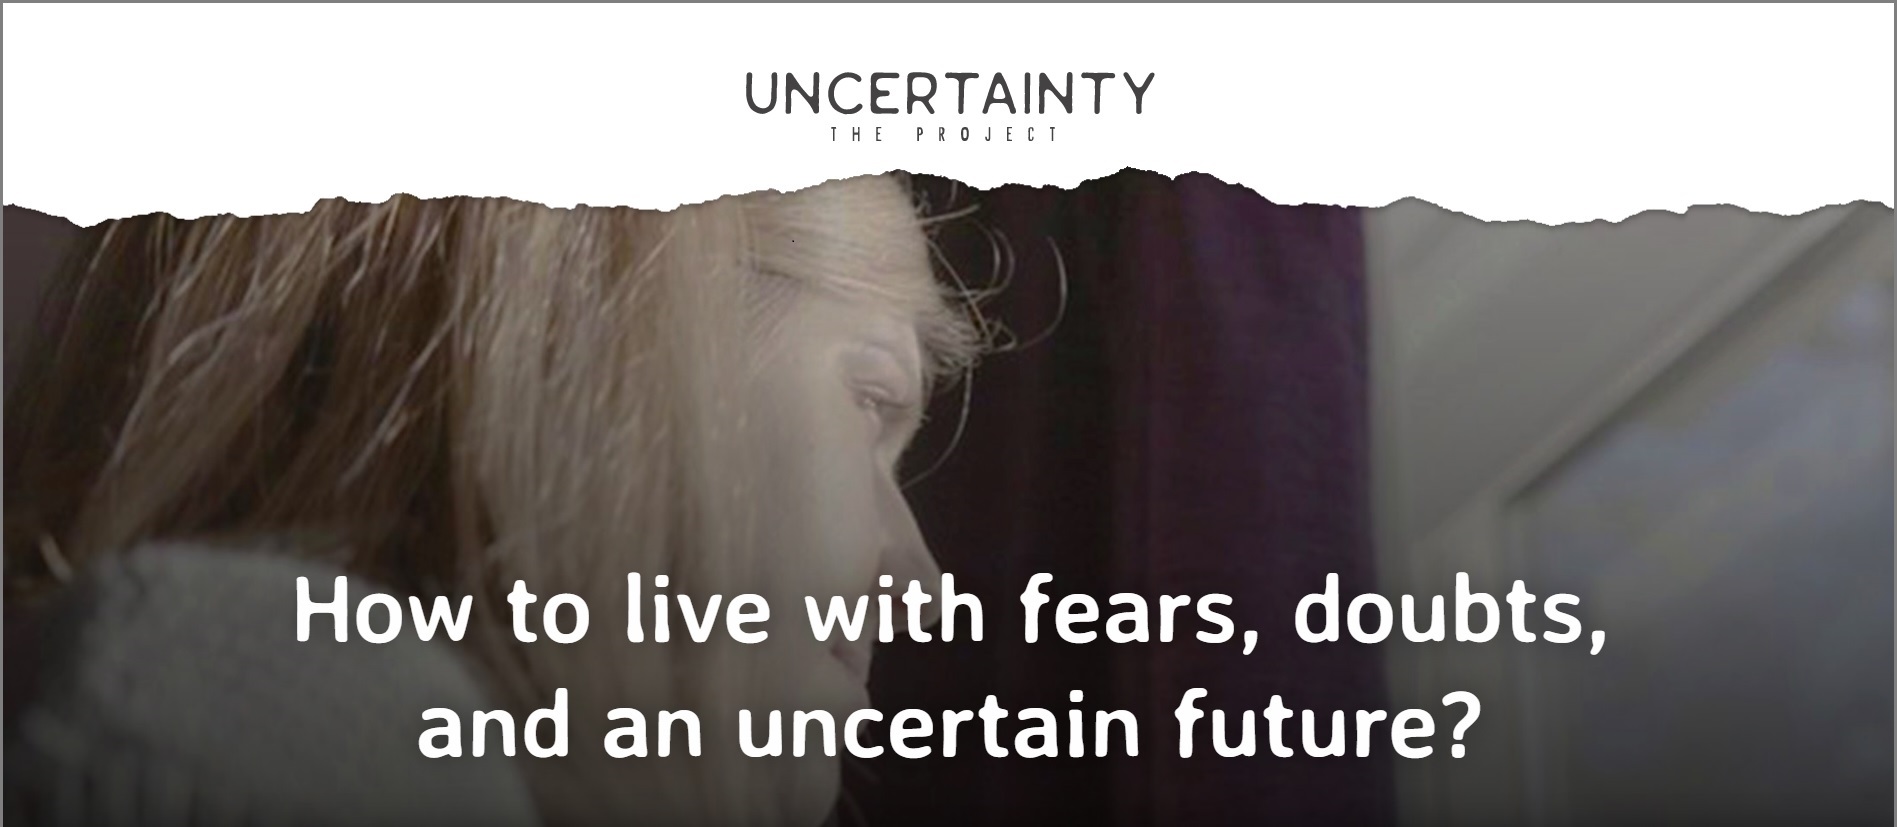 uncertainity the project